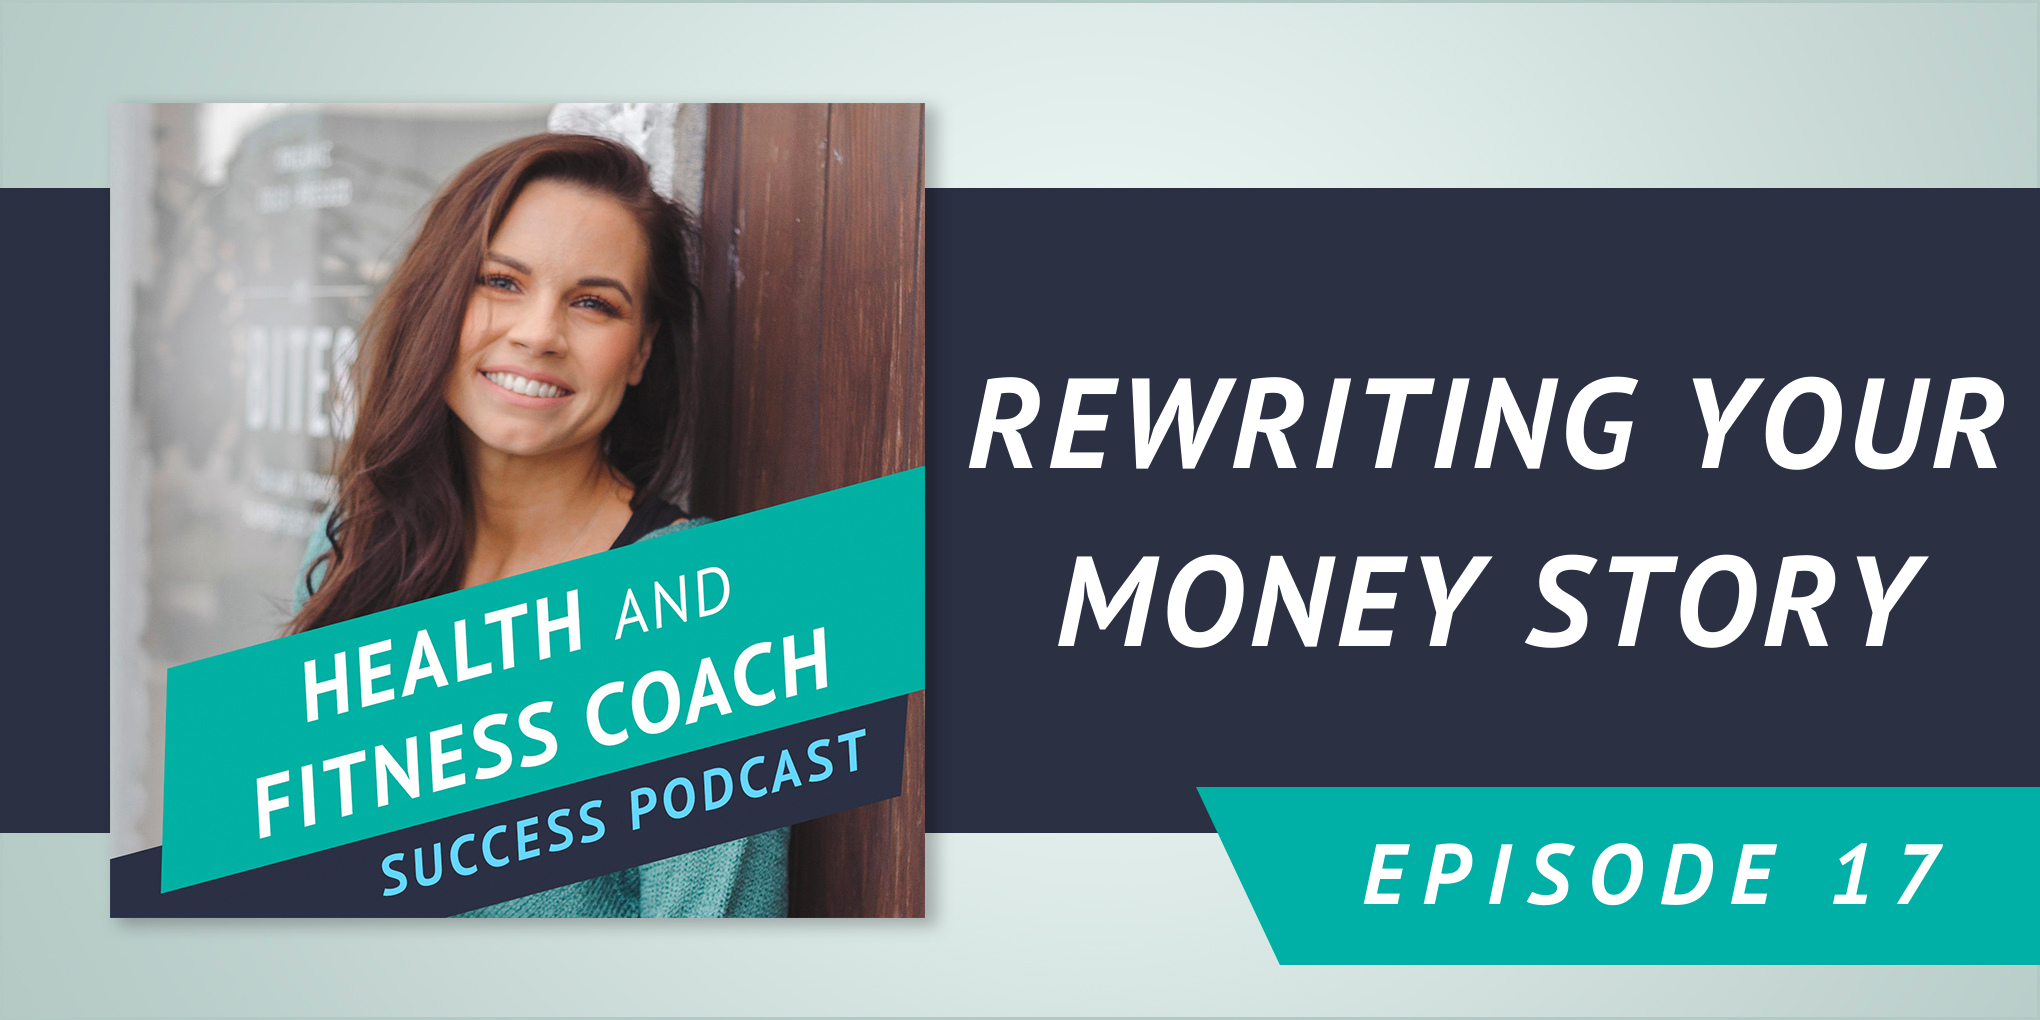 Rewriting Your Money Story